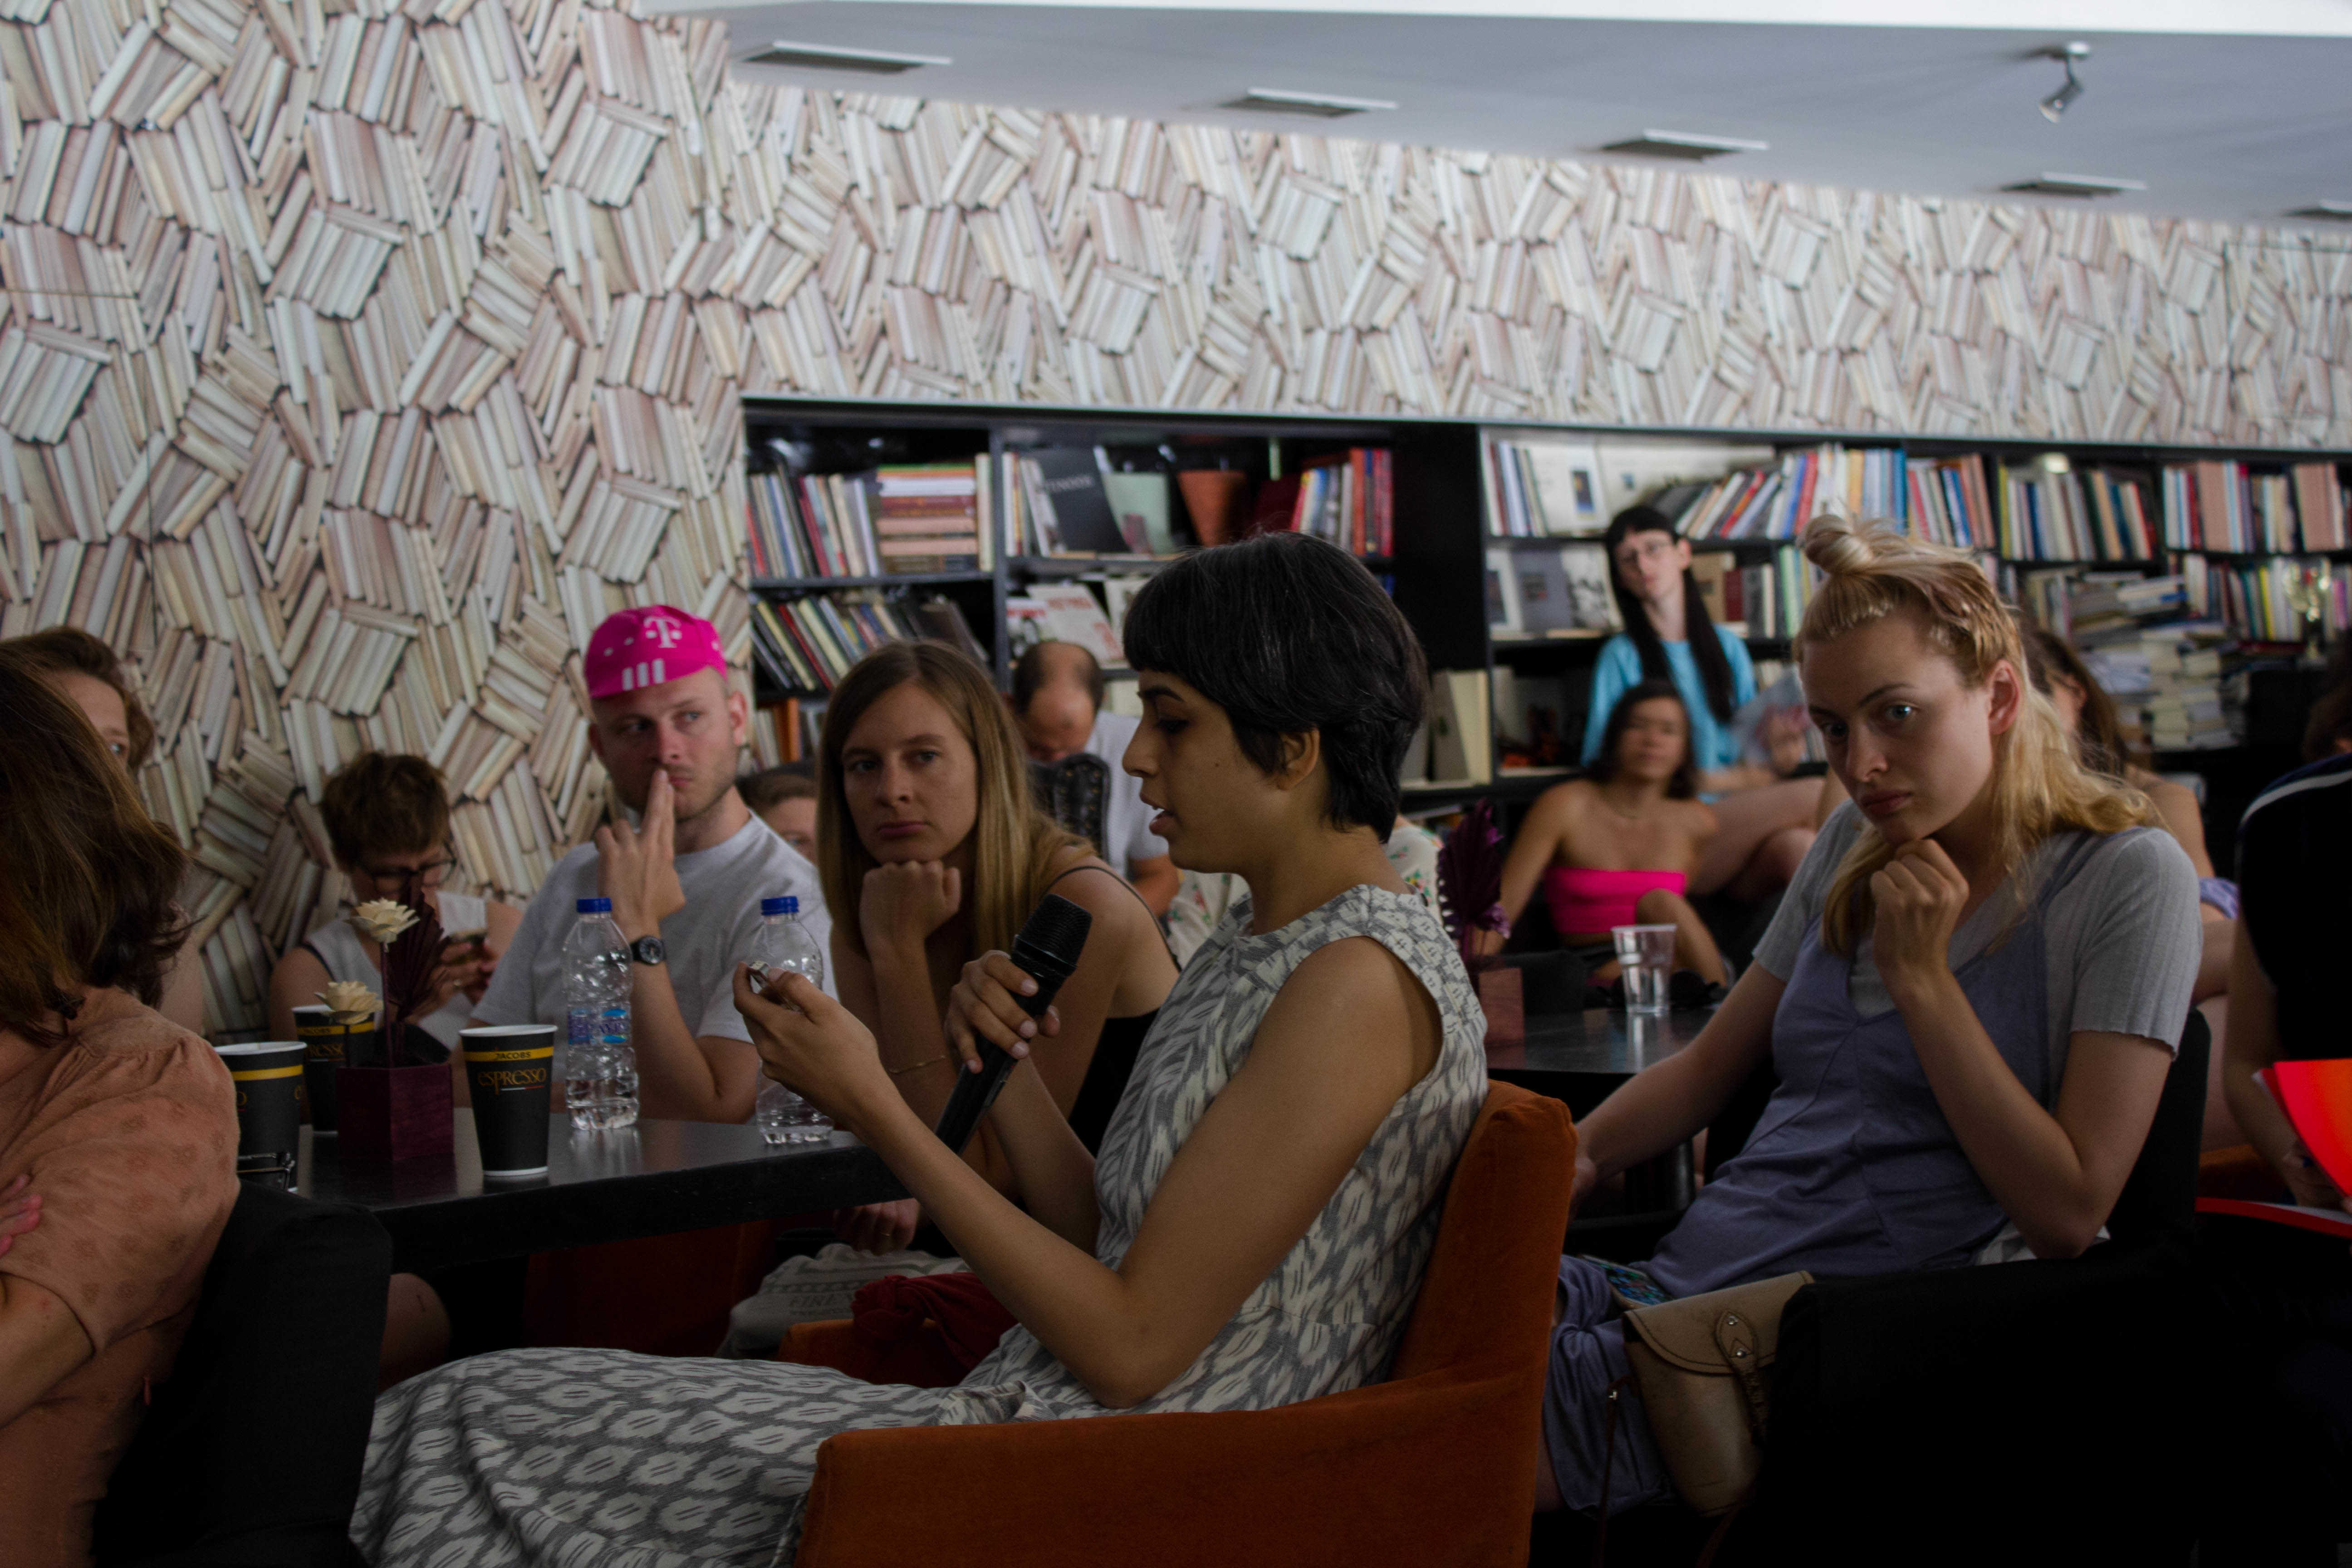 COOP SUMMIT 2018. Final presentation by the ‘Proximity Aesthetics’ study group at the Polis Art Cafe in Athens on June 2. In the picture: Vinita Gatne reading from the Proximity Aesthetics website on her phone. Photo: Silvia Ulloa for DAI Roaming Academy.